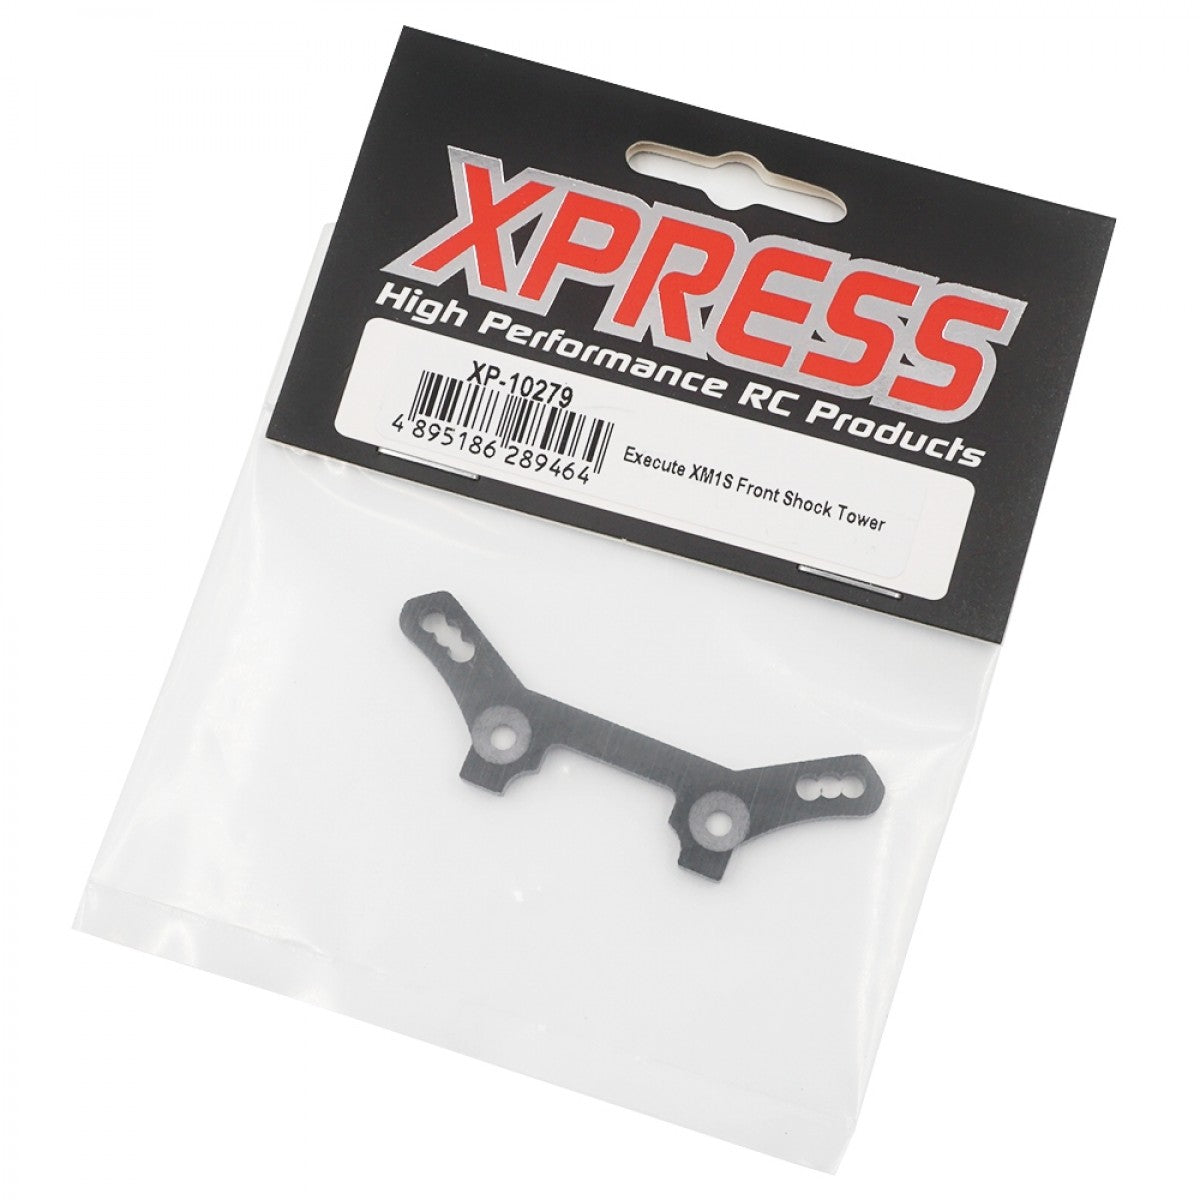 Xpress XP-10279 Front Shock Tower for XM1S FM1S